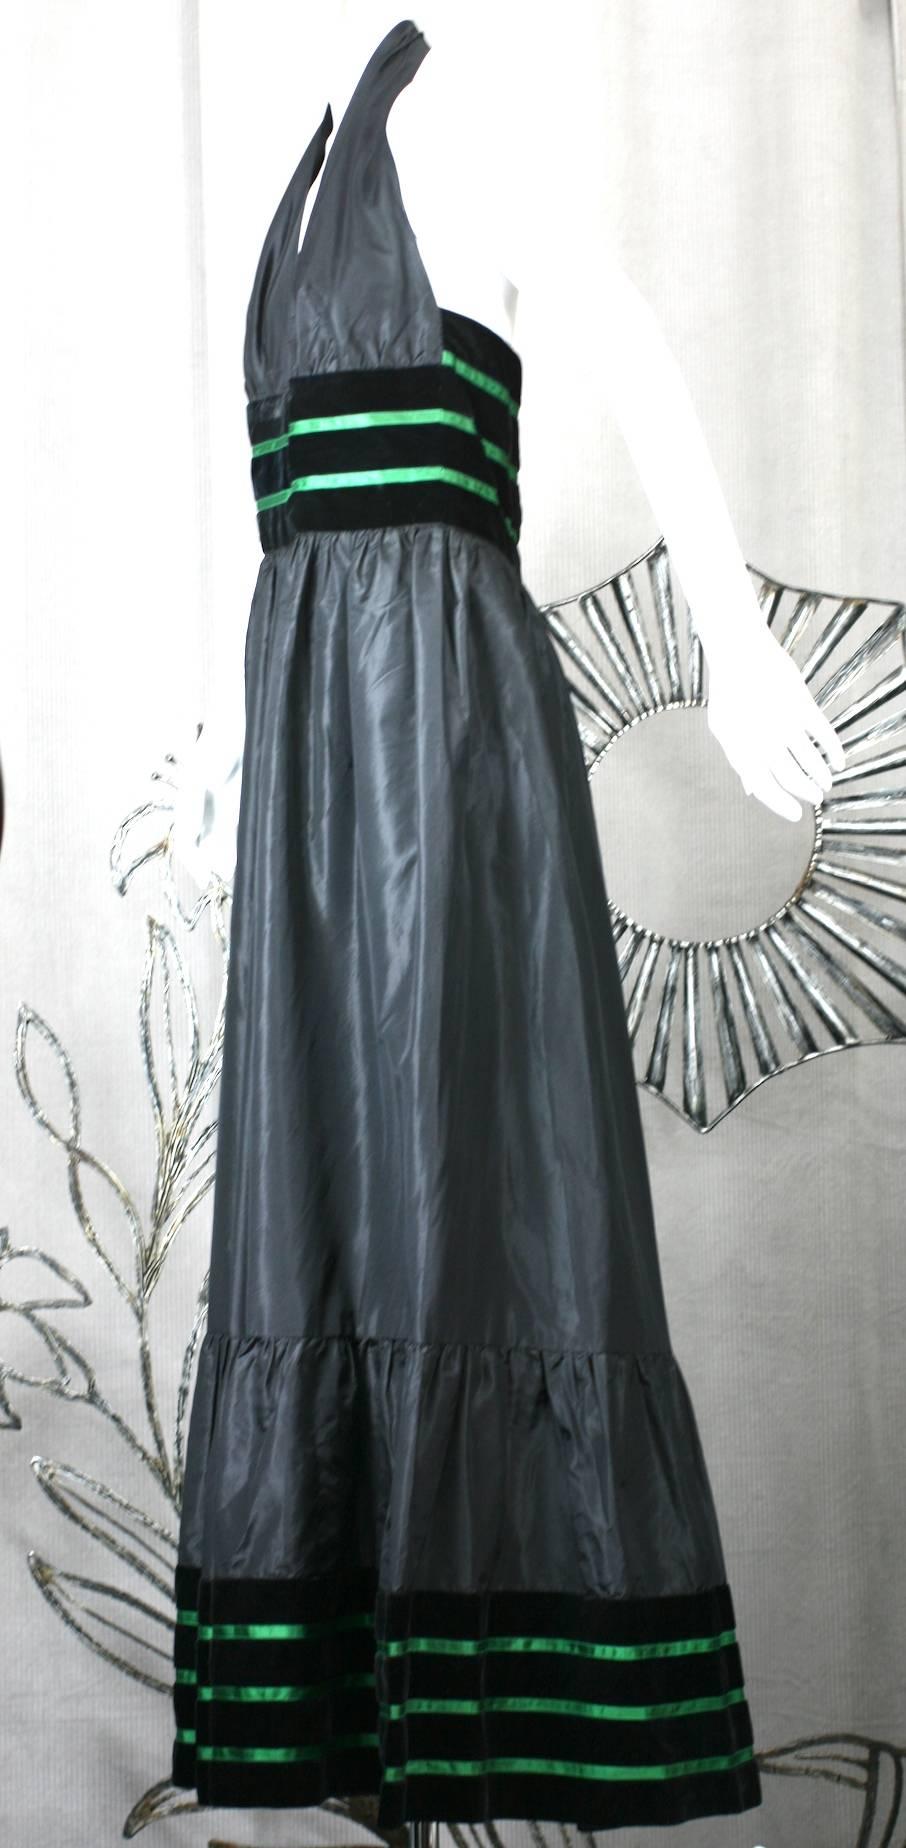 Lanvin Haute Couture Silk Taffeta Halter. Simple and flattering halter neckline is held by a wide band of black silk velvet trimmed with bright green satin ribbon. The motif is repeated along the hem as well.  
Full gathered skirt falls from waist